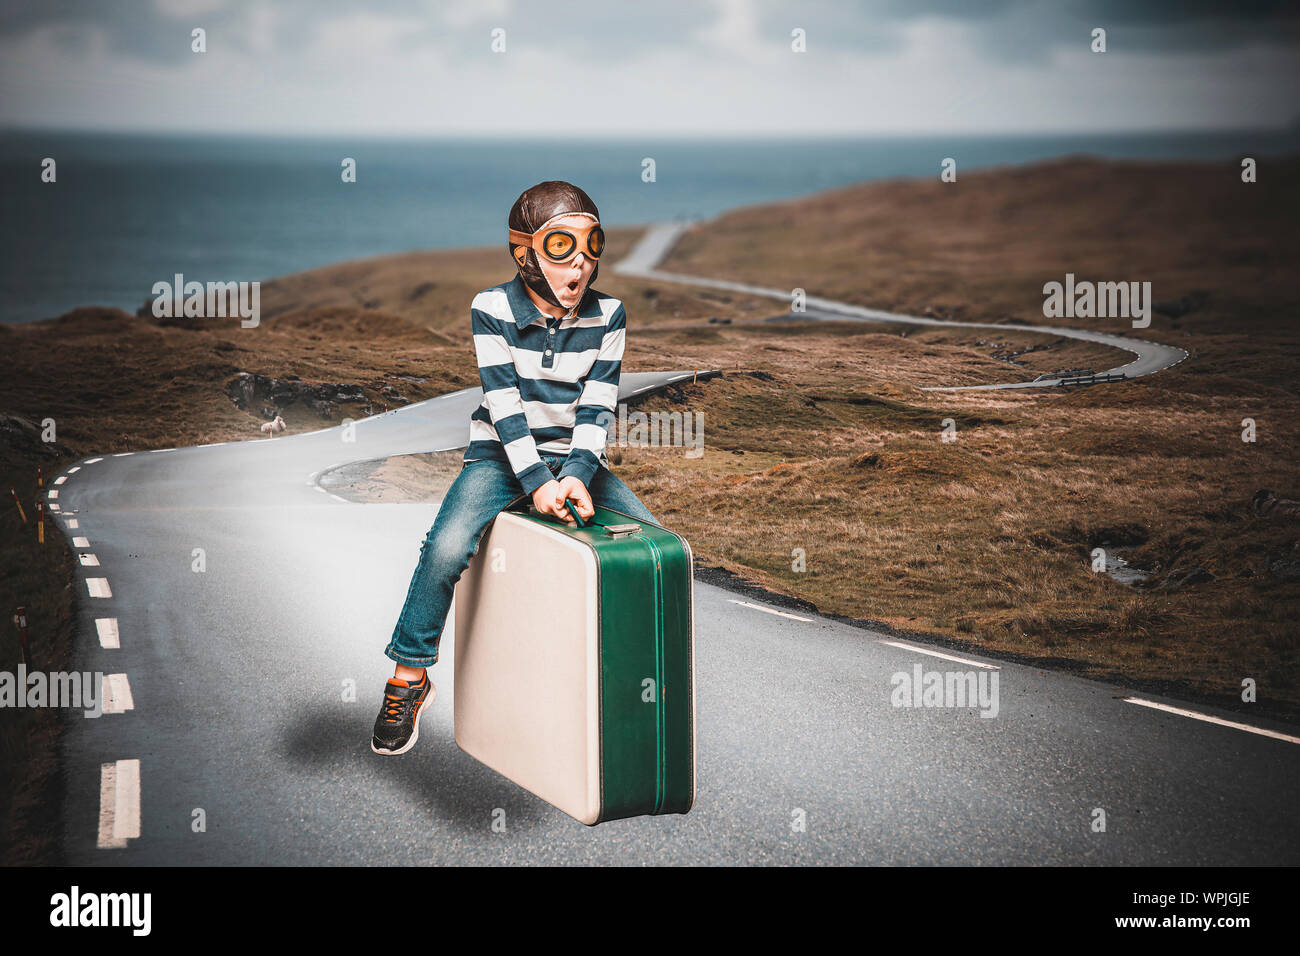 child dressed as an airman on a suitcase imagines to live an adventure flying on a lost road Stock Photo